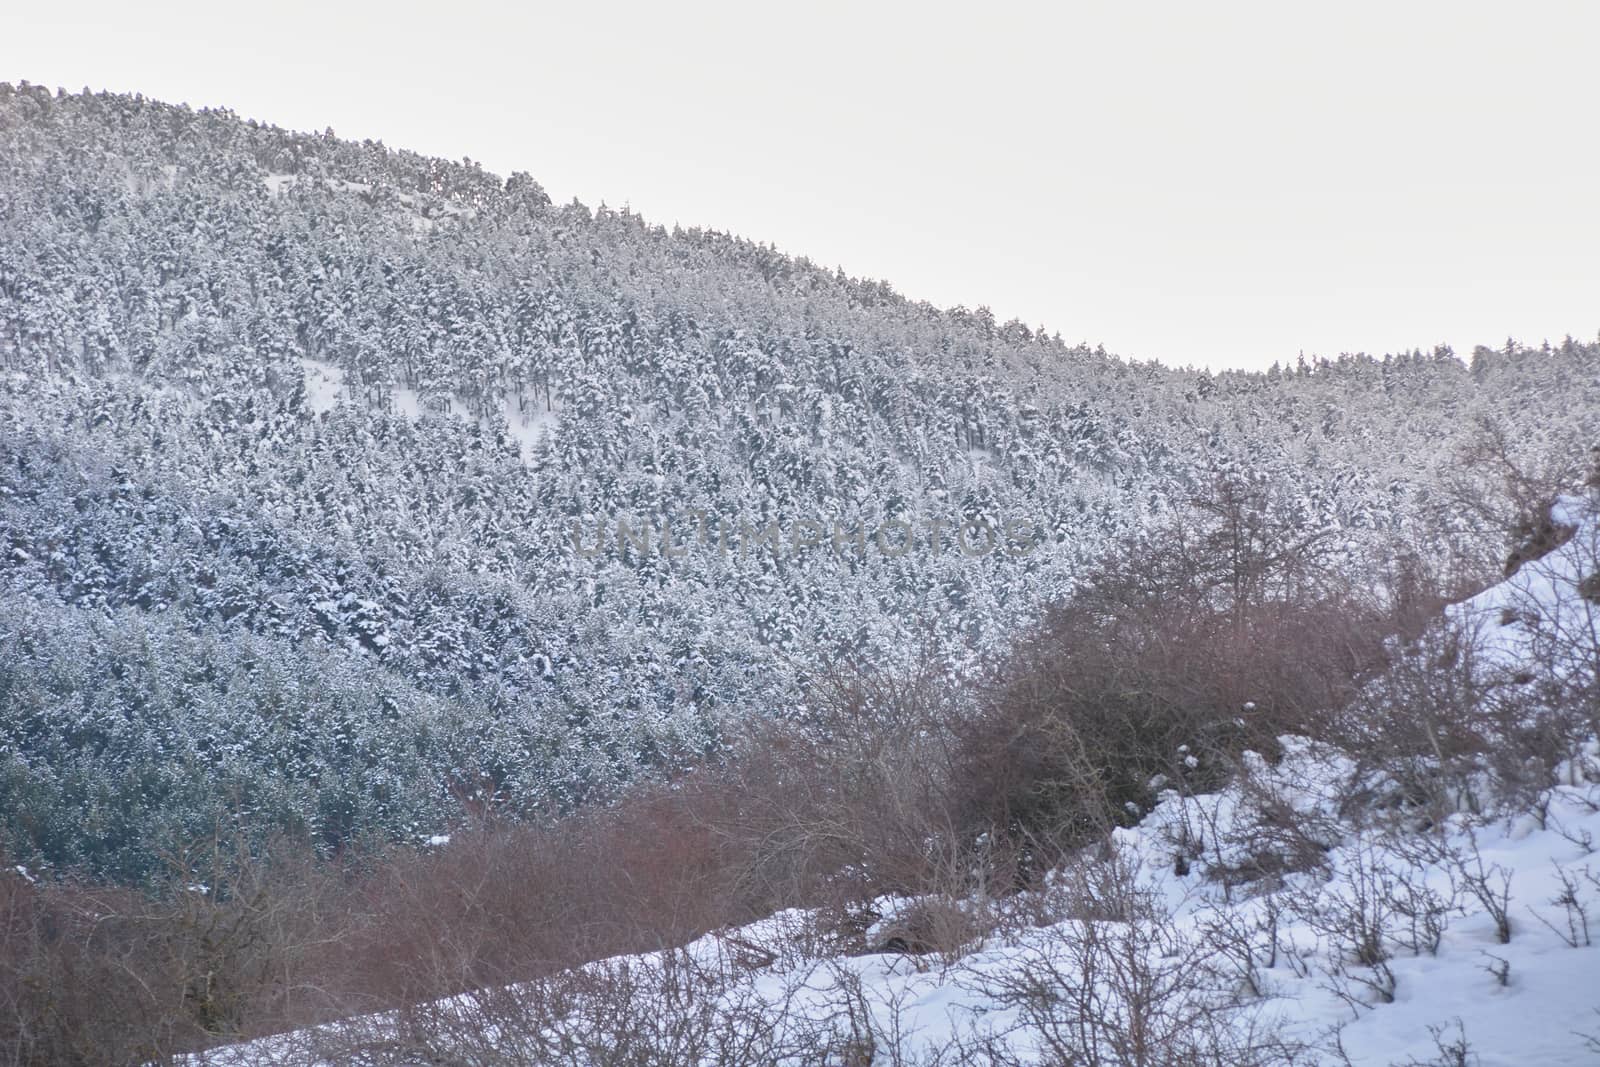 Snowy and cold mountain forest landscape